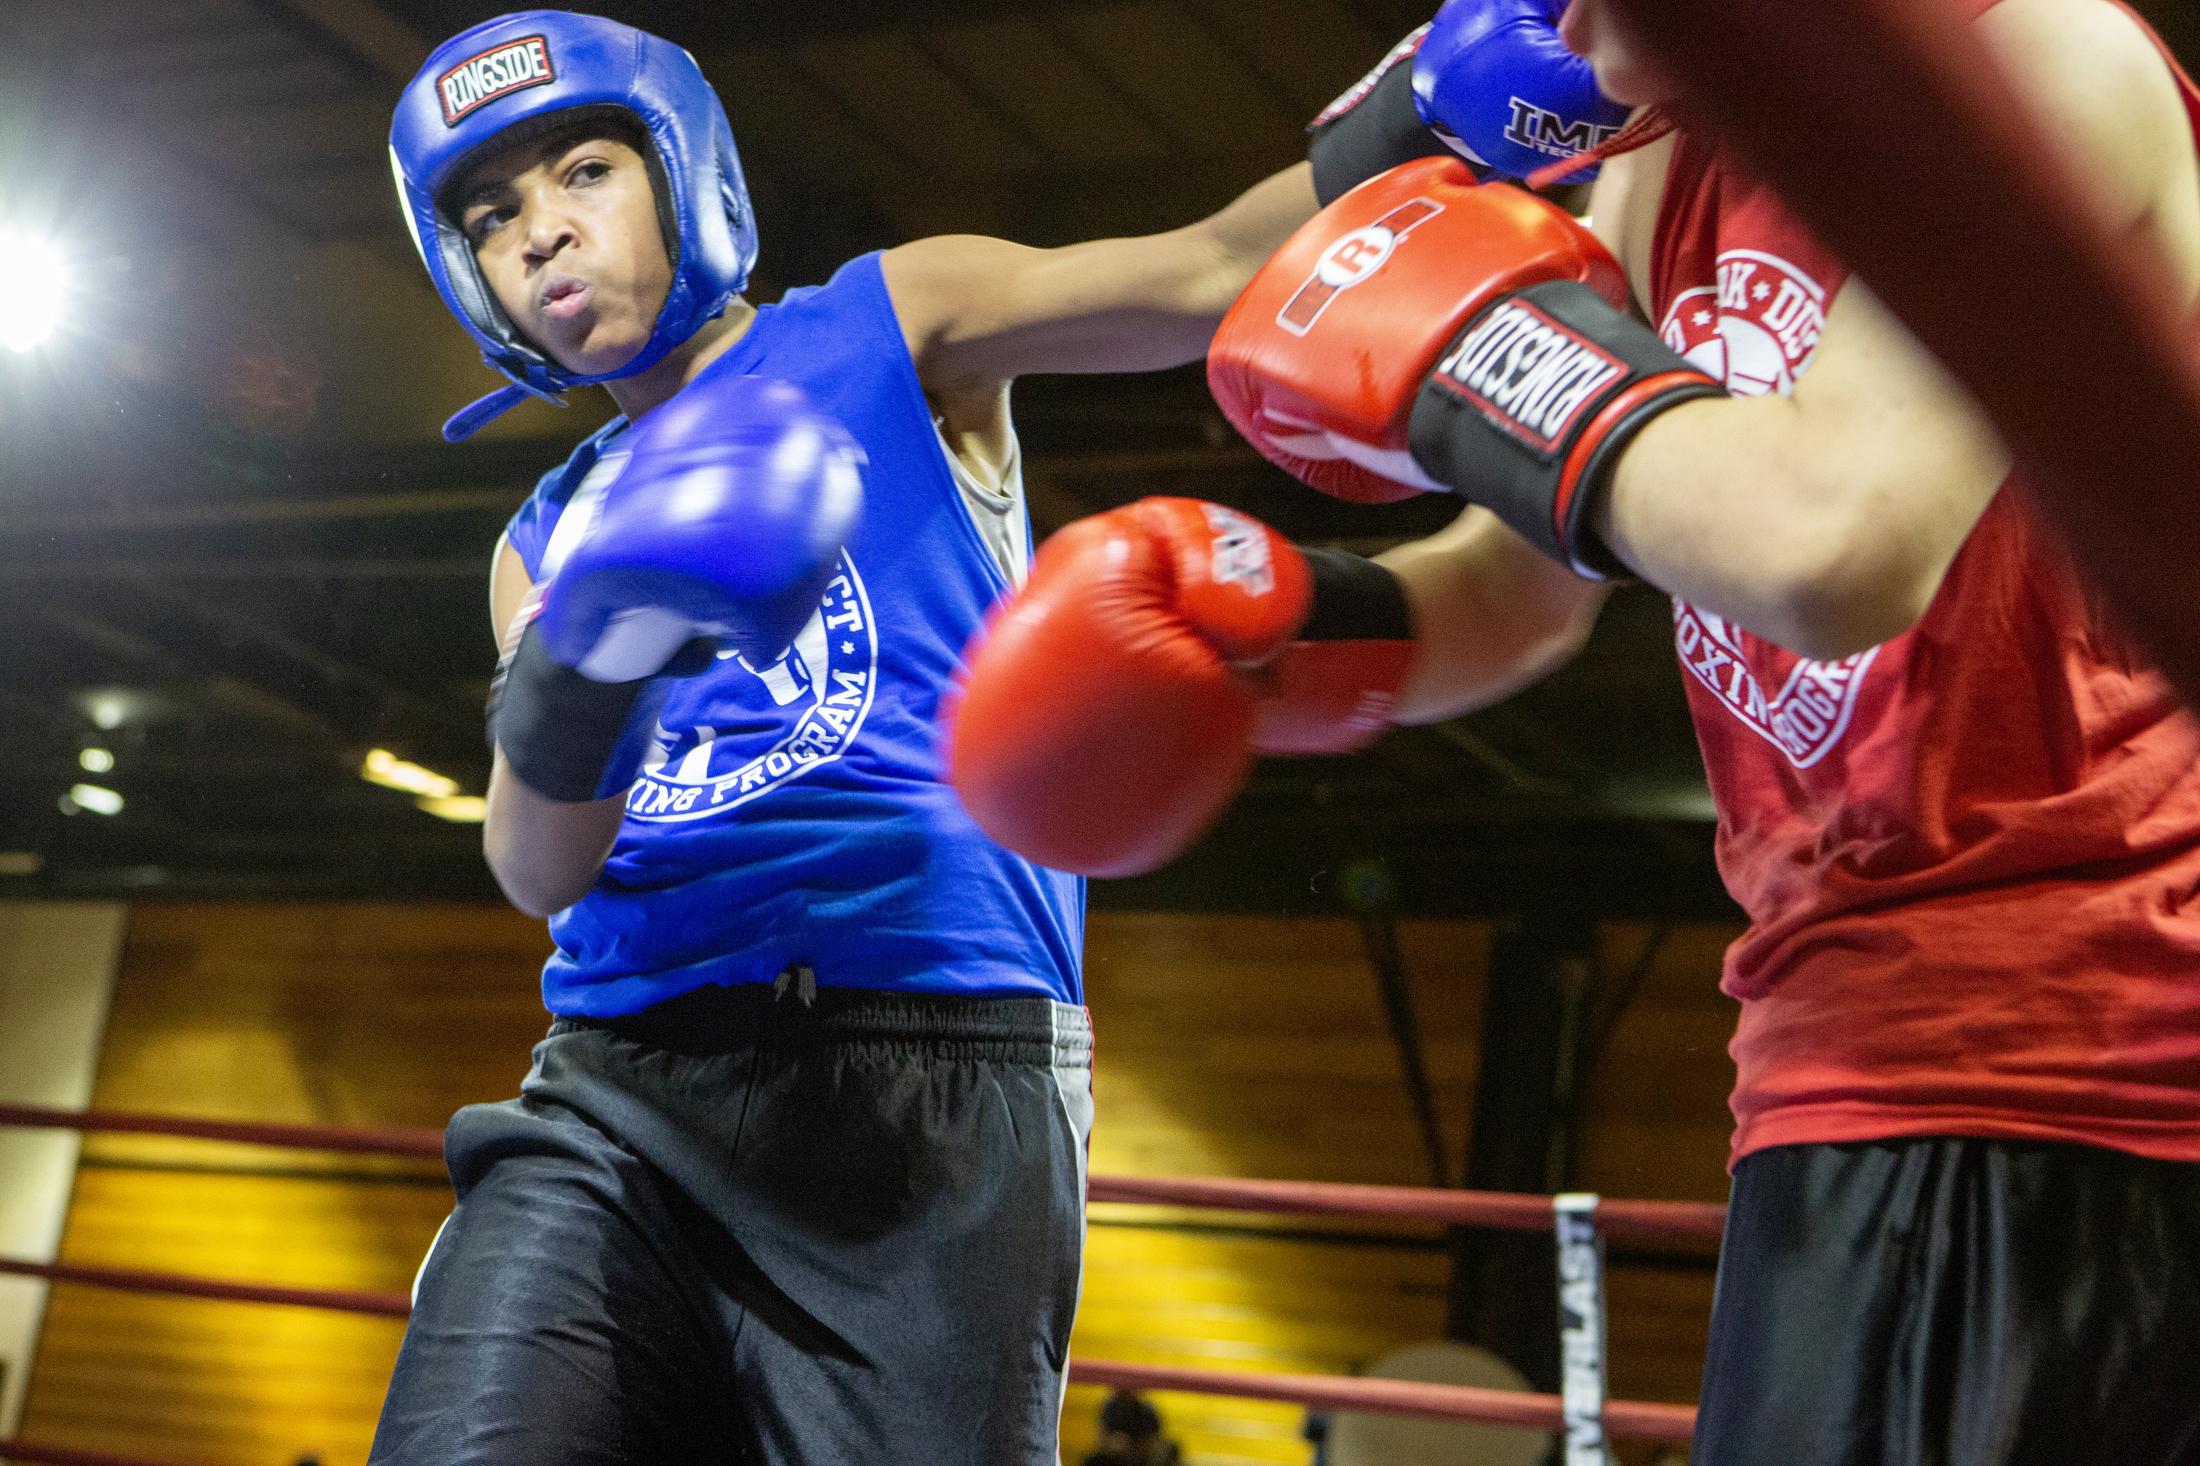 10 years in a boxing gym - CHICAGO, APRIL 9, 2015 : The Crushers compete in the...